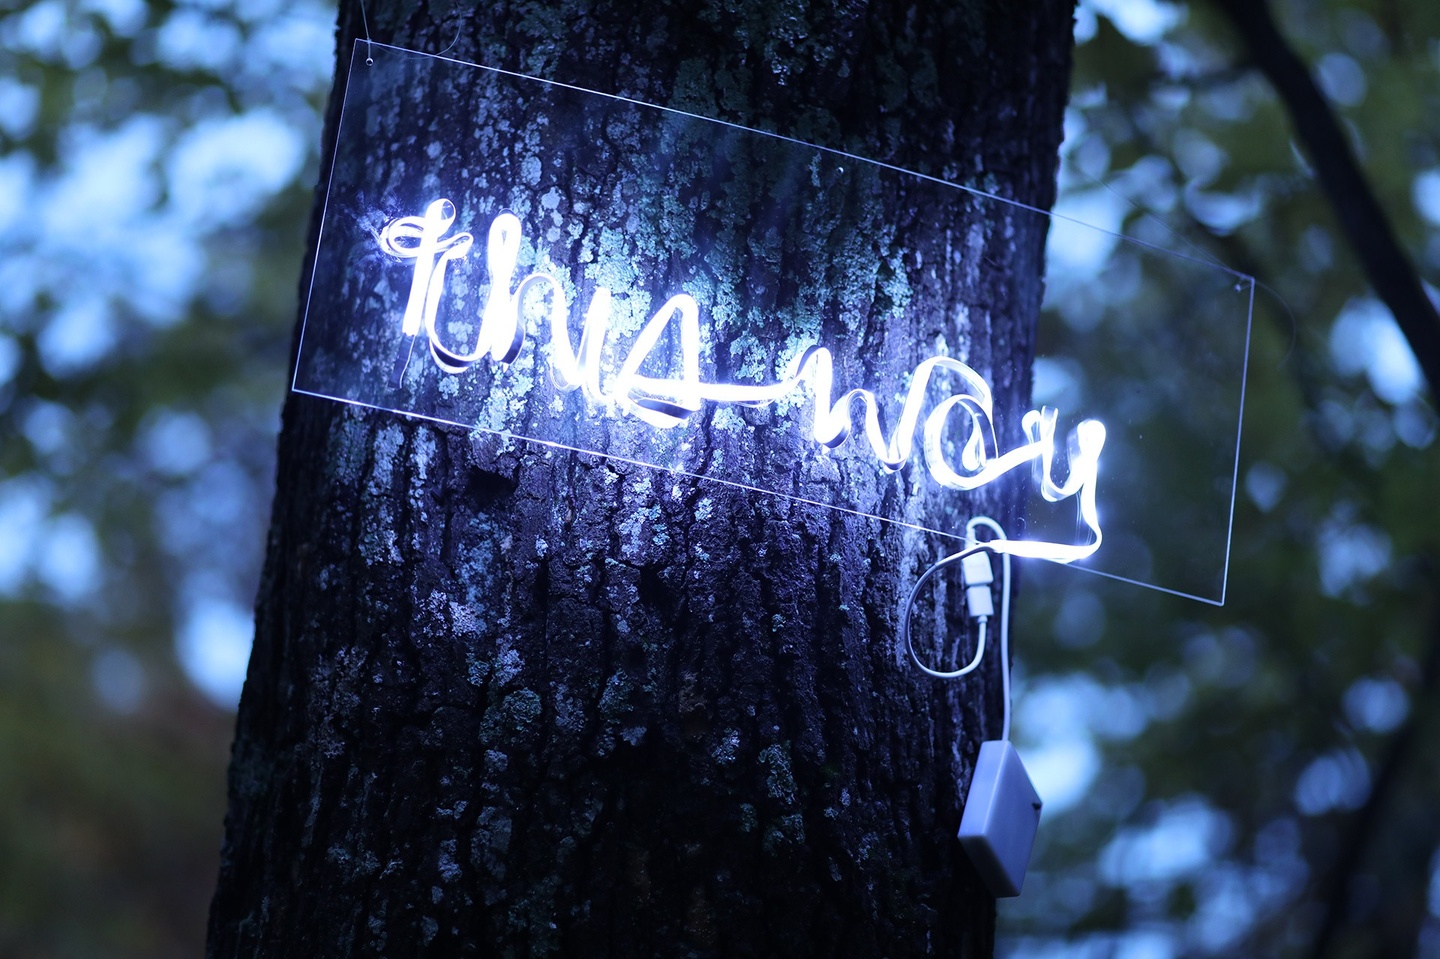 In a dimly lit environment, the words "this way" rendered in a fluorescent/shining light, placed against a pane of transparent material. The words are positioned on the trunk of a tree; in the background are branches and leaves, blurred out of focus.